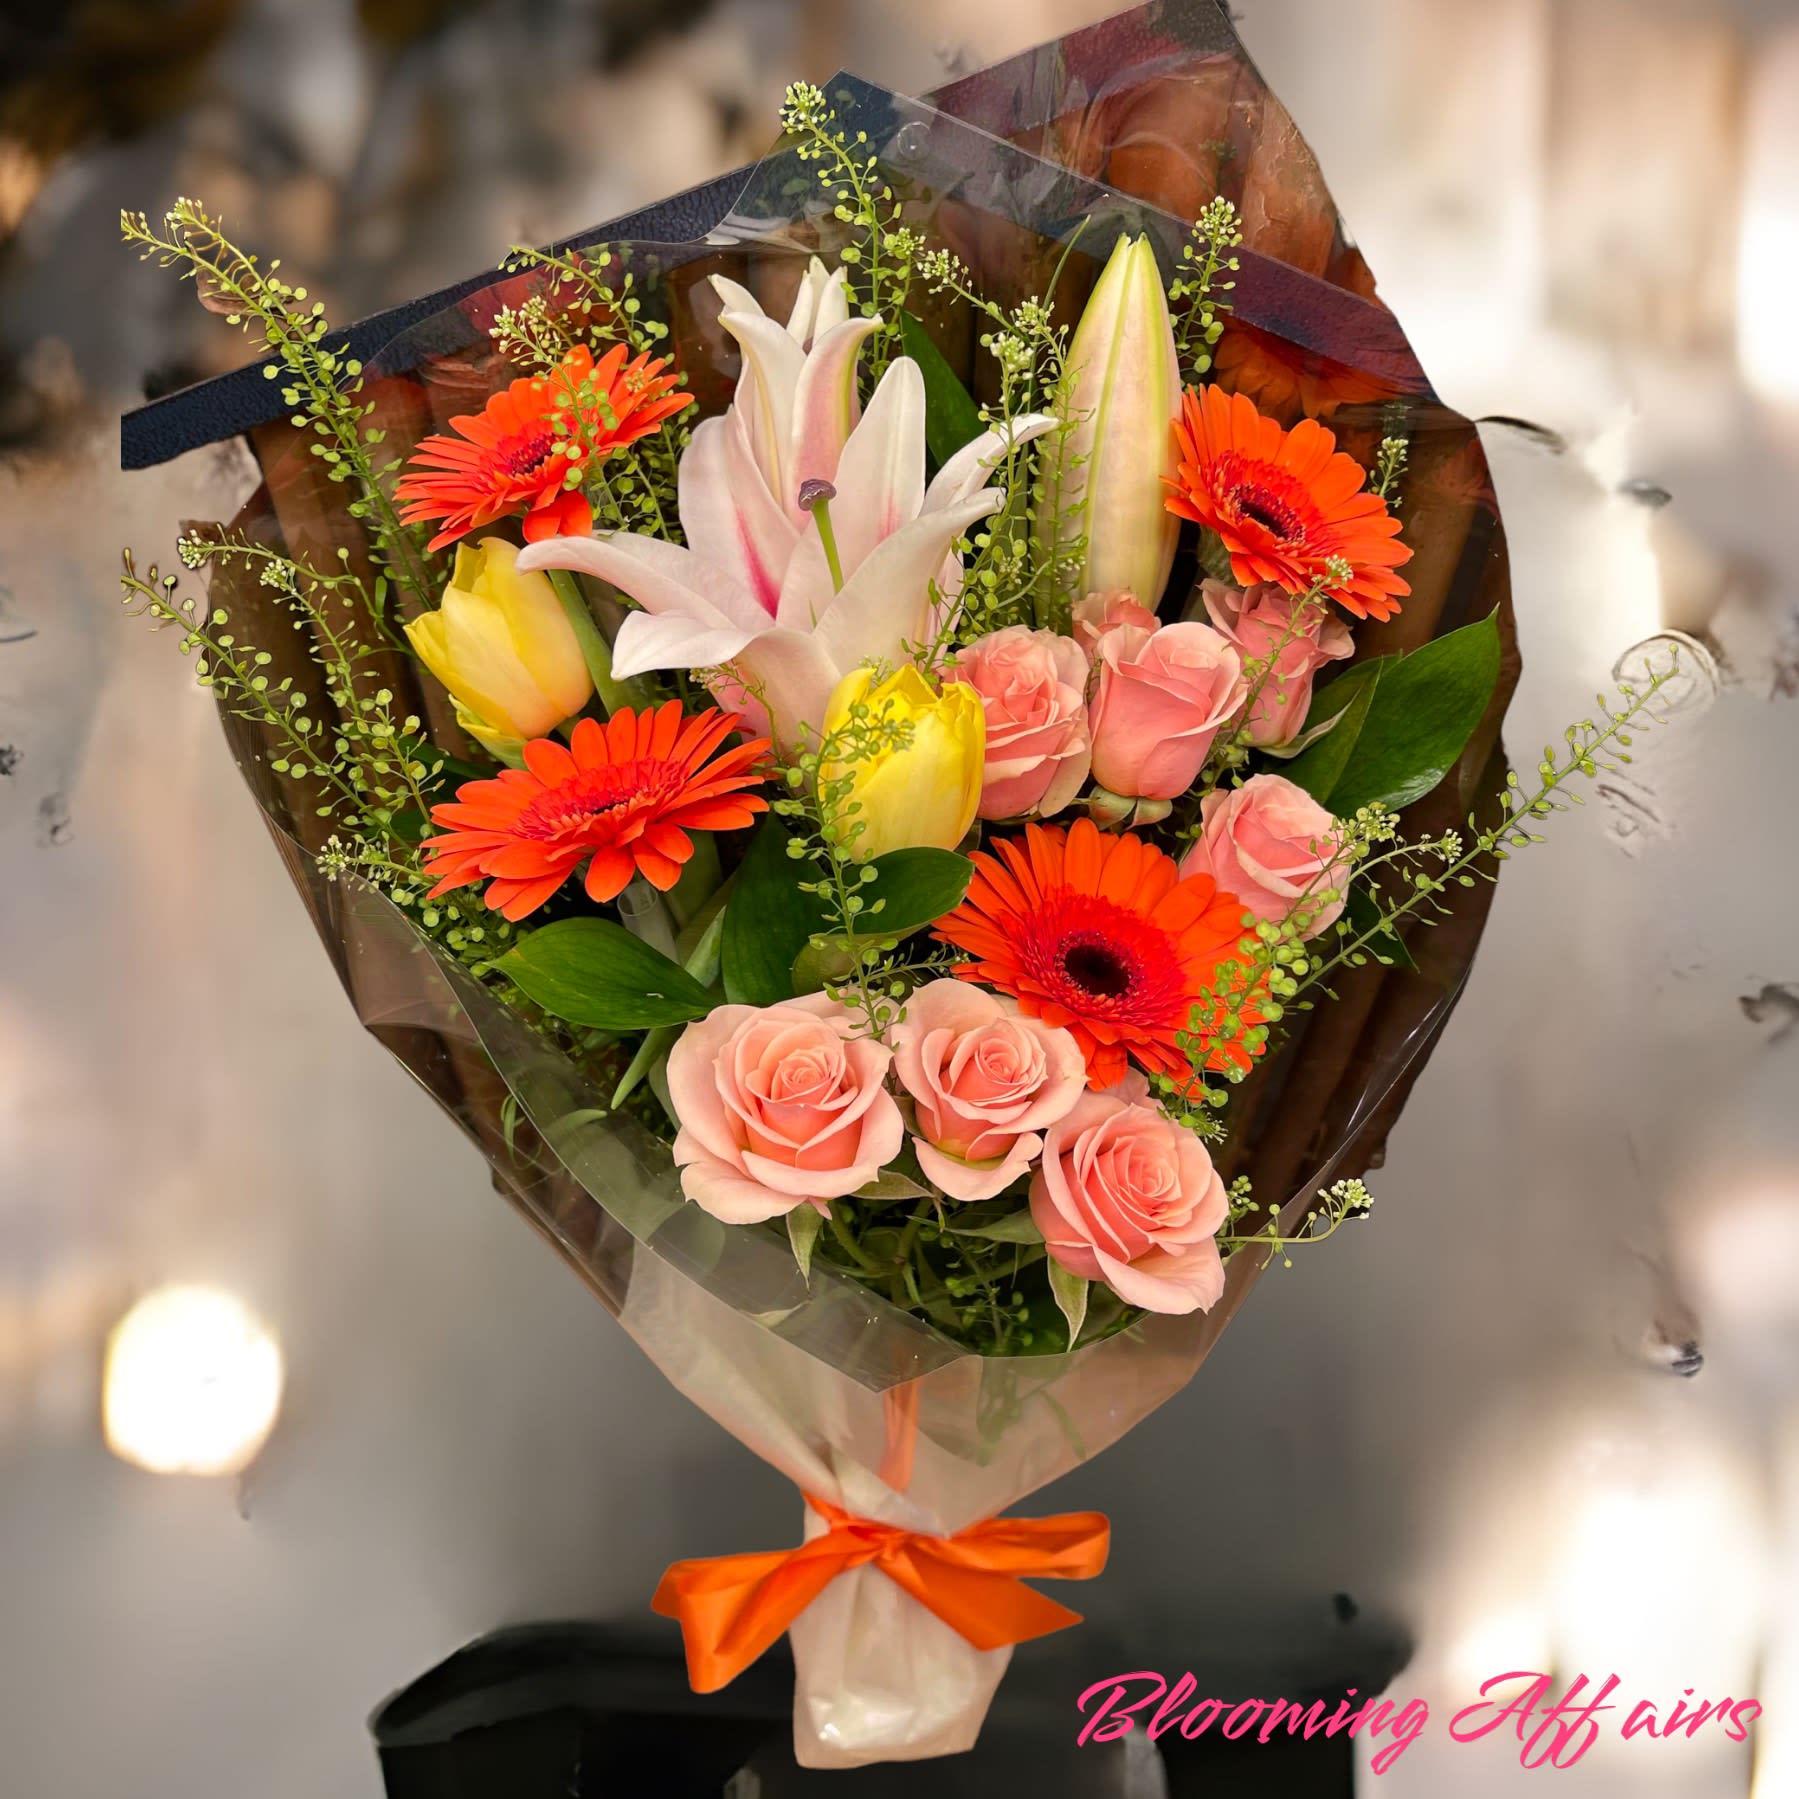 Bloom0418 - Gerbera Daisies, Tulips, Lilies  and Spray roses Bouquet without a vase